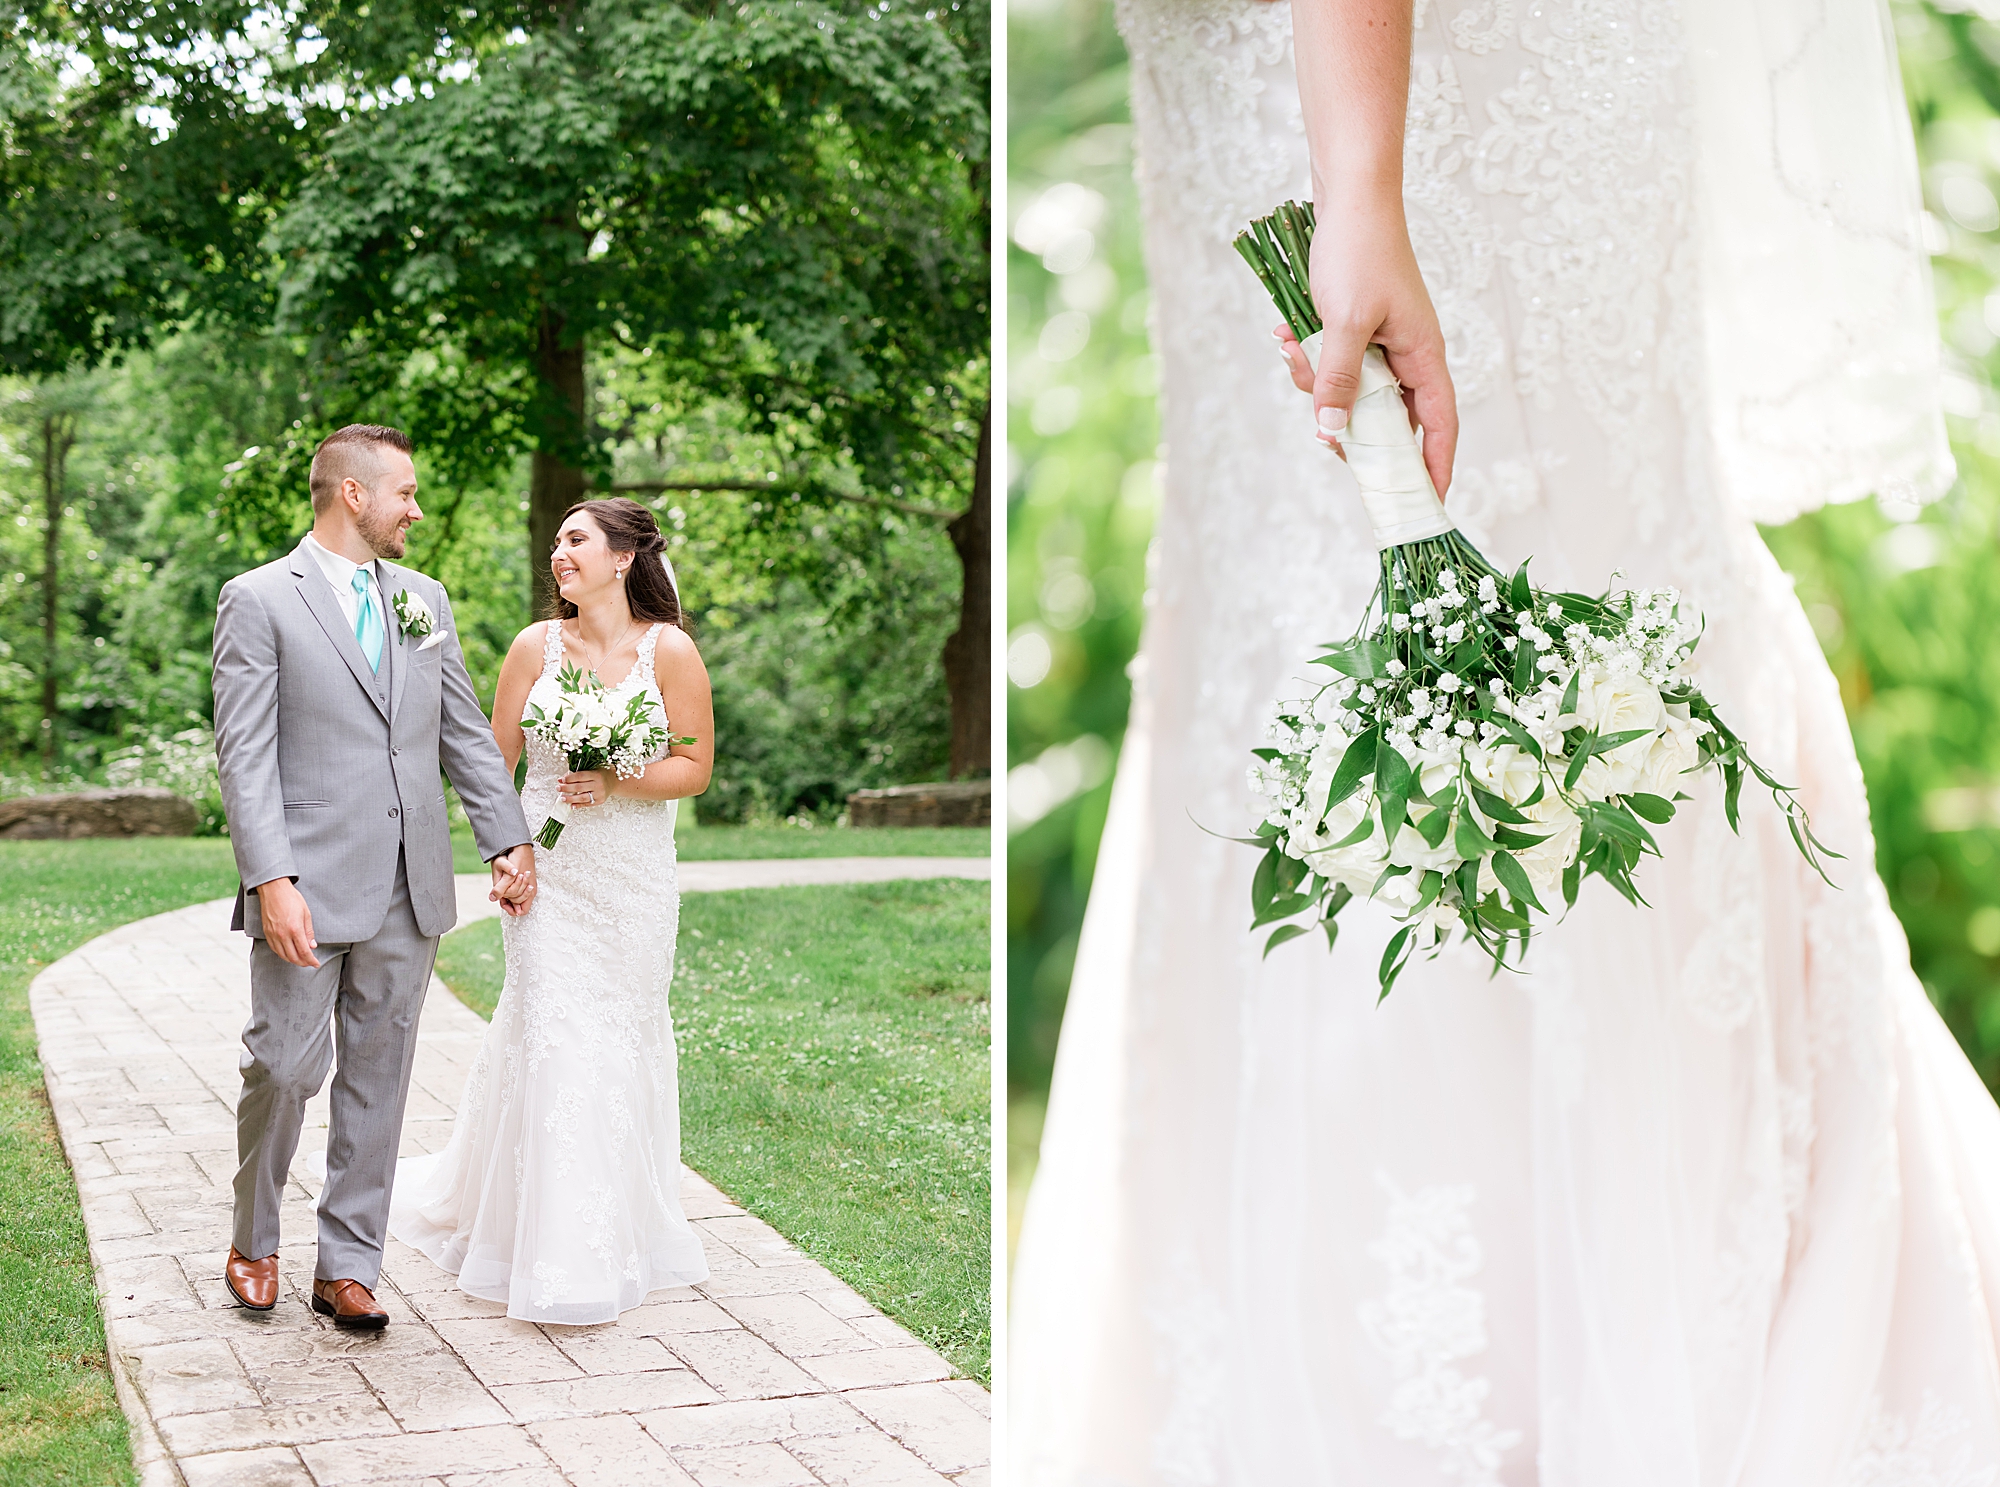 A sweet late July summer wedding at the Palazzo Grande in Shelby Township, Michigan by Breanne Rochelle Photography.